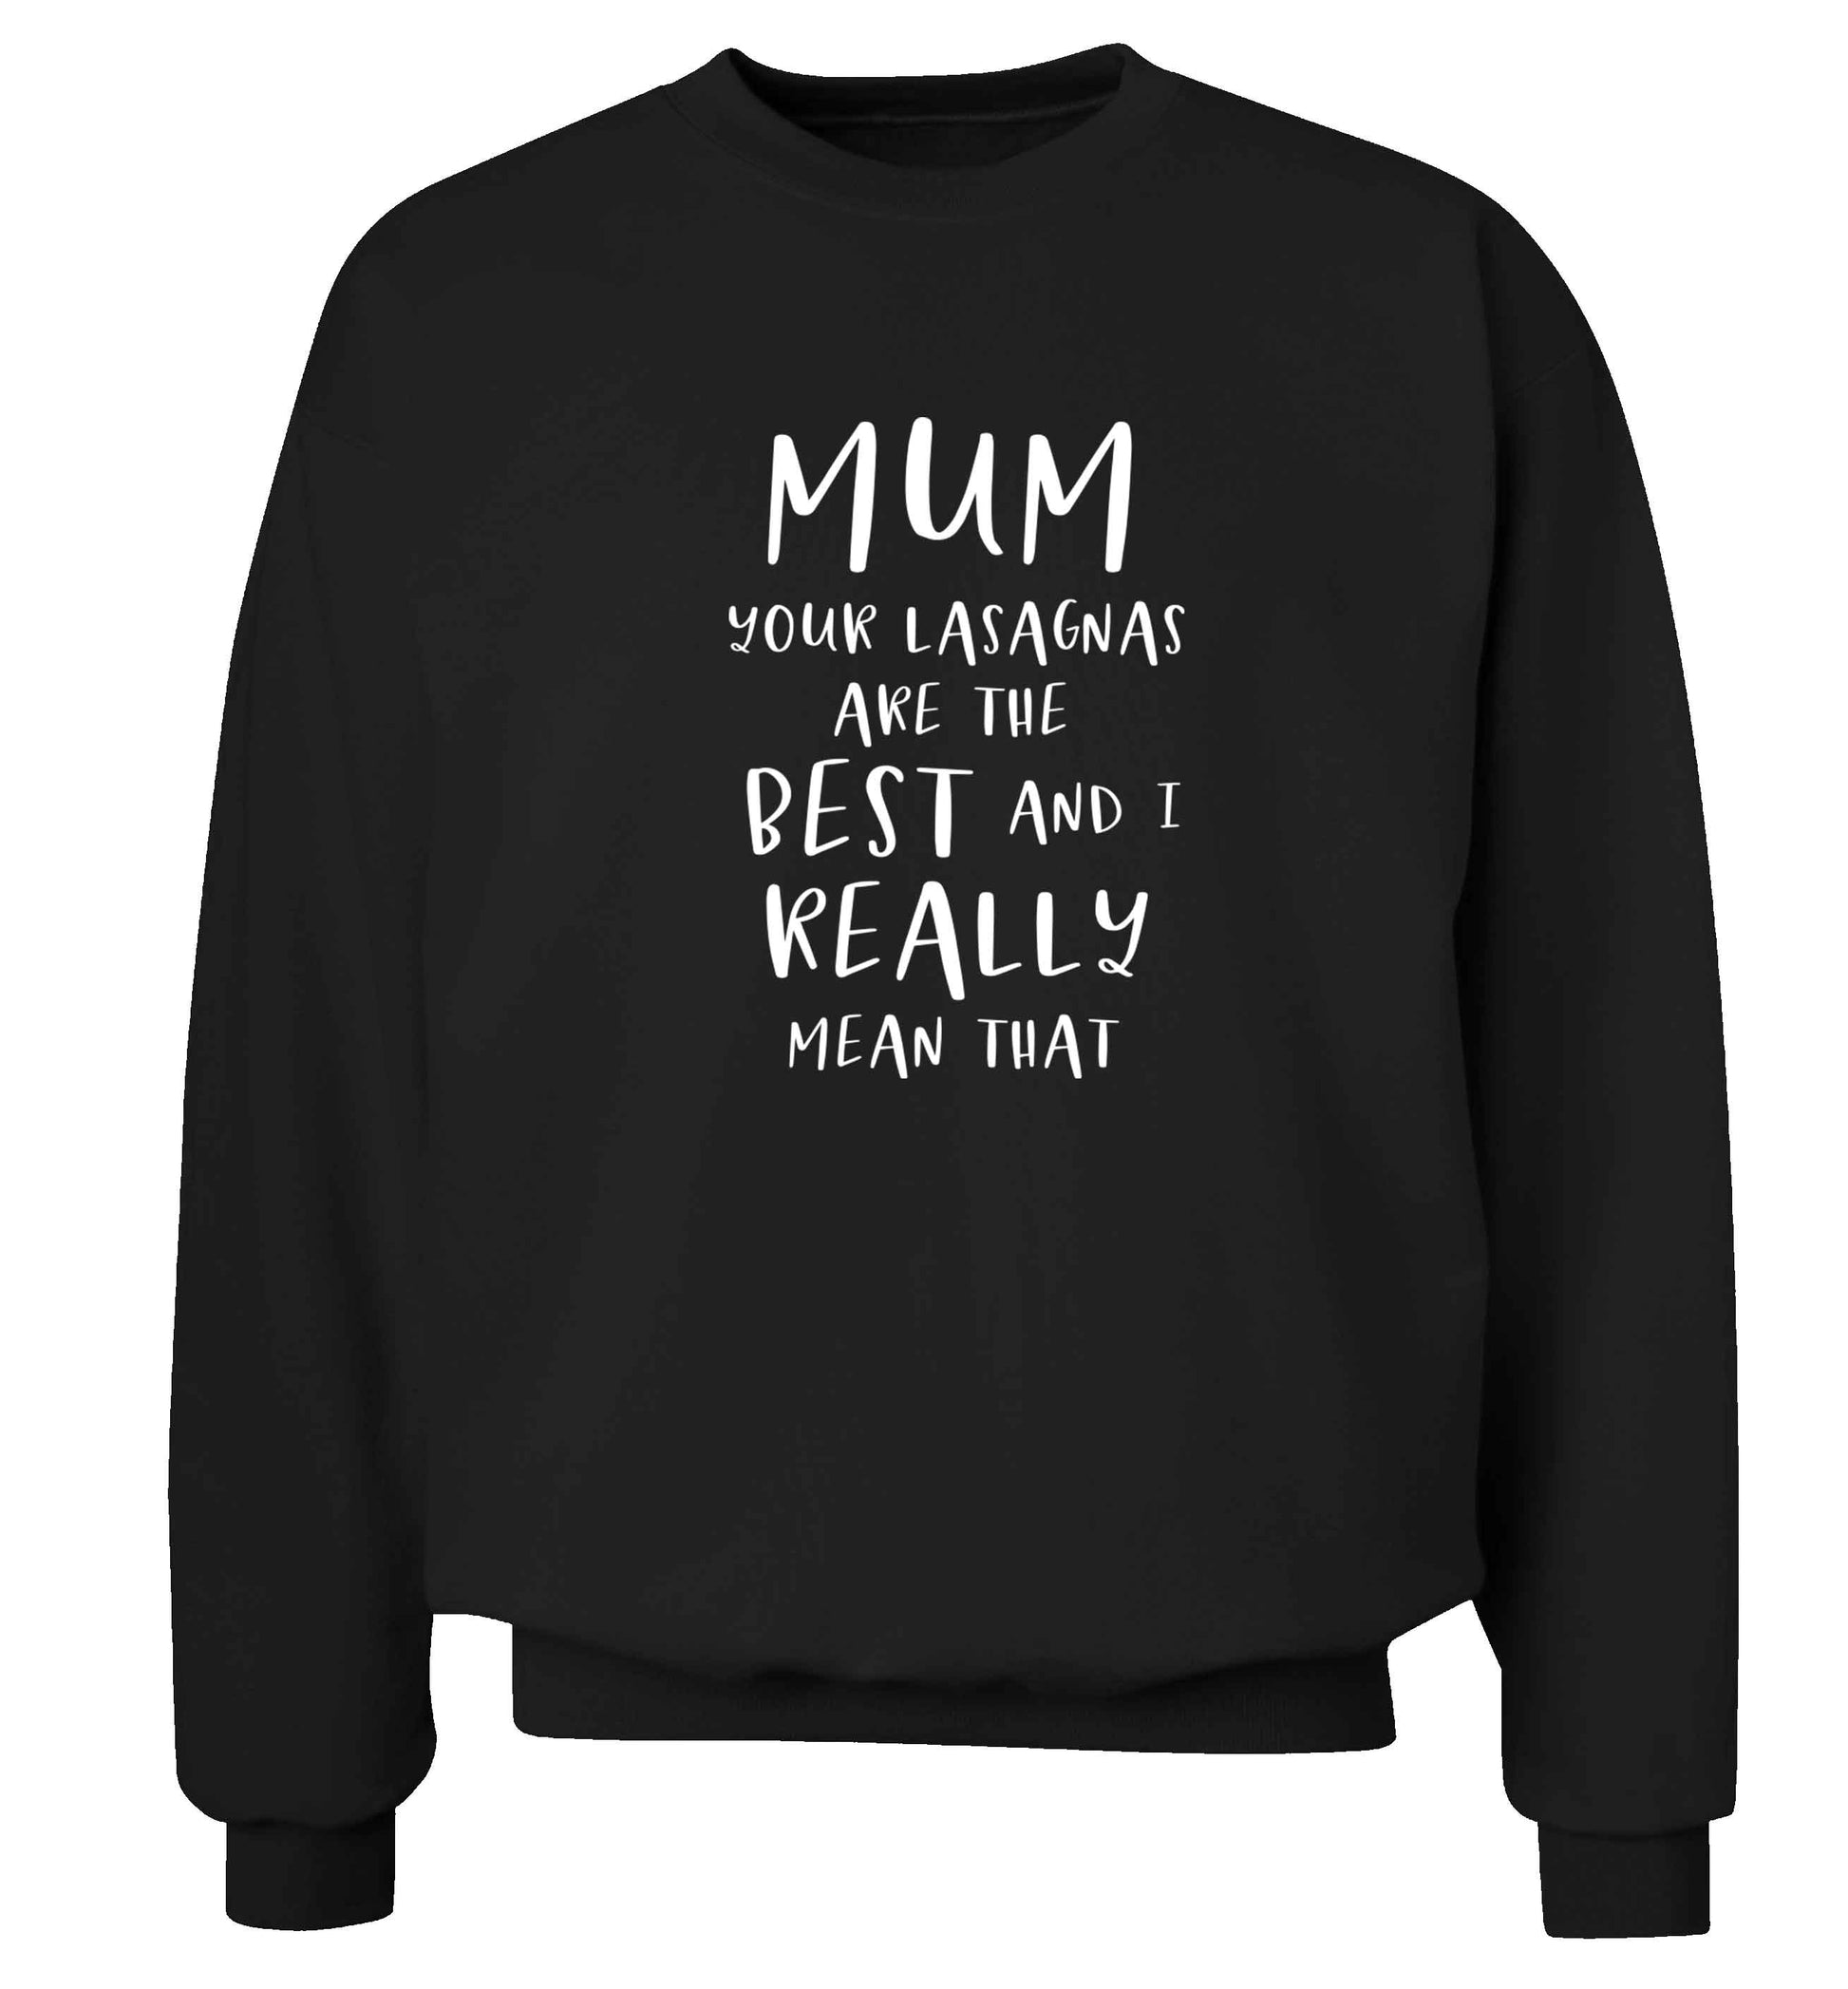 Funny gifts for your mum on mother's dayor her birthday! Mum your lasagnas are the best and I really mean that adult's unisex black sweater 2XL